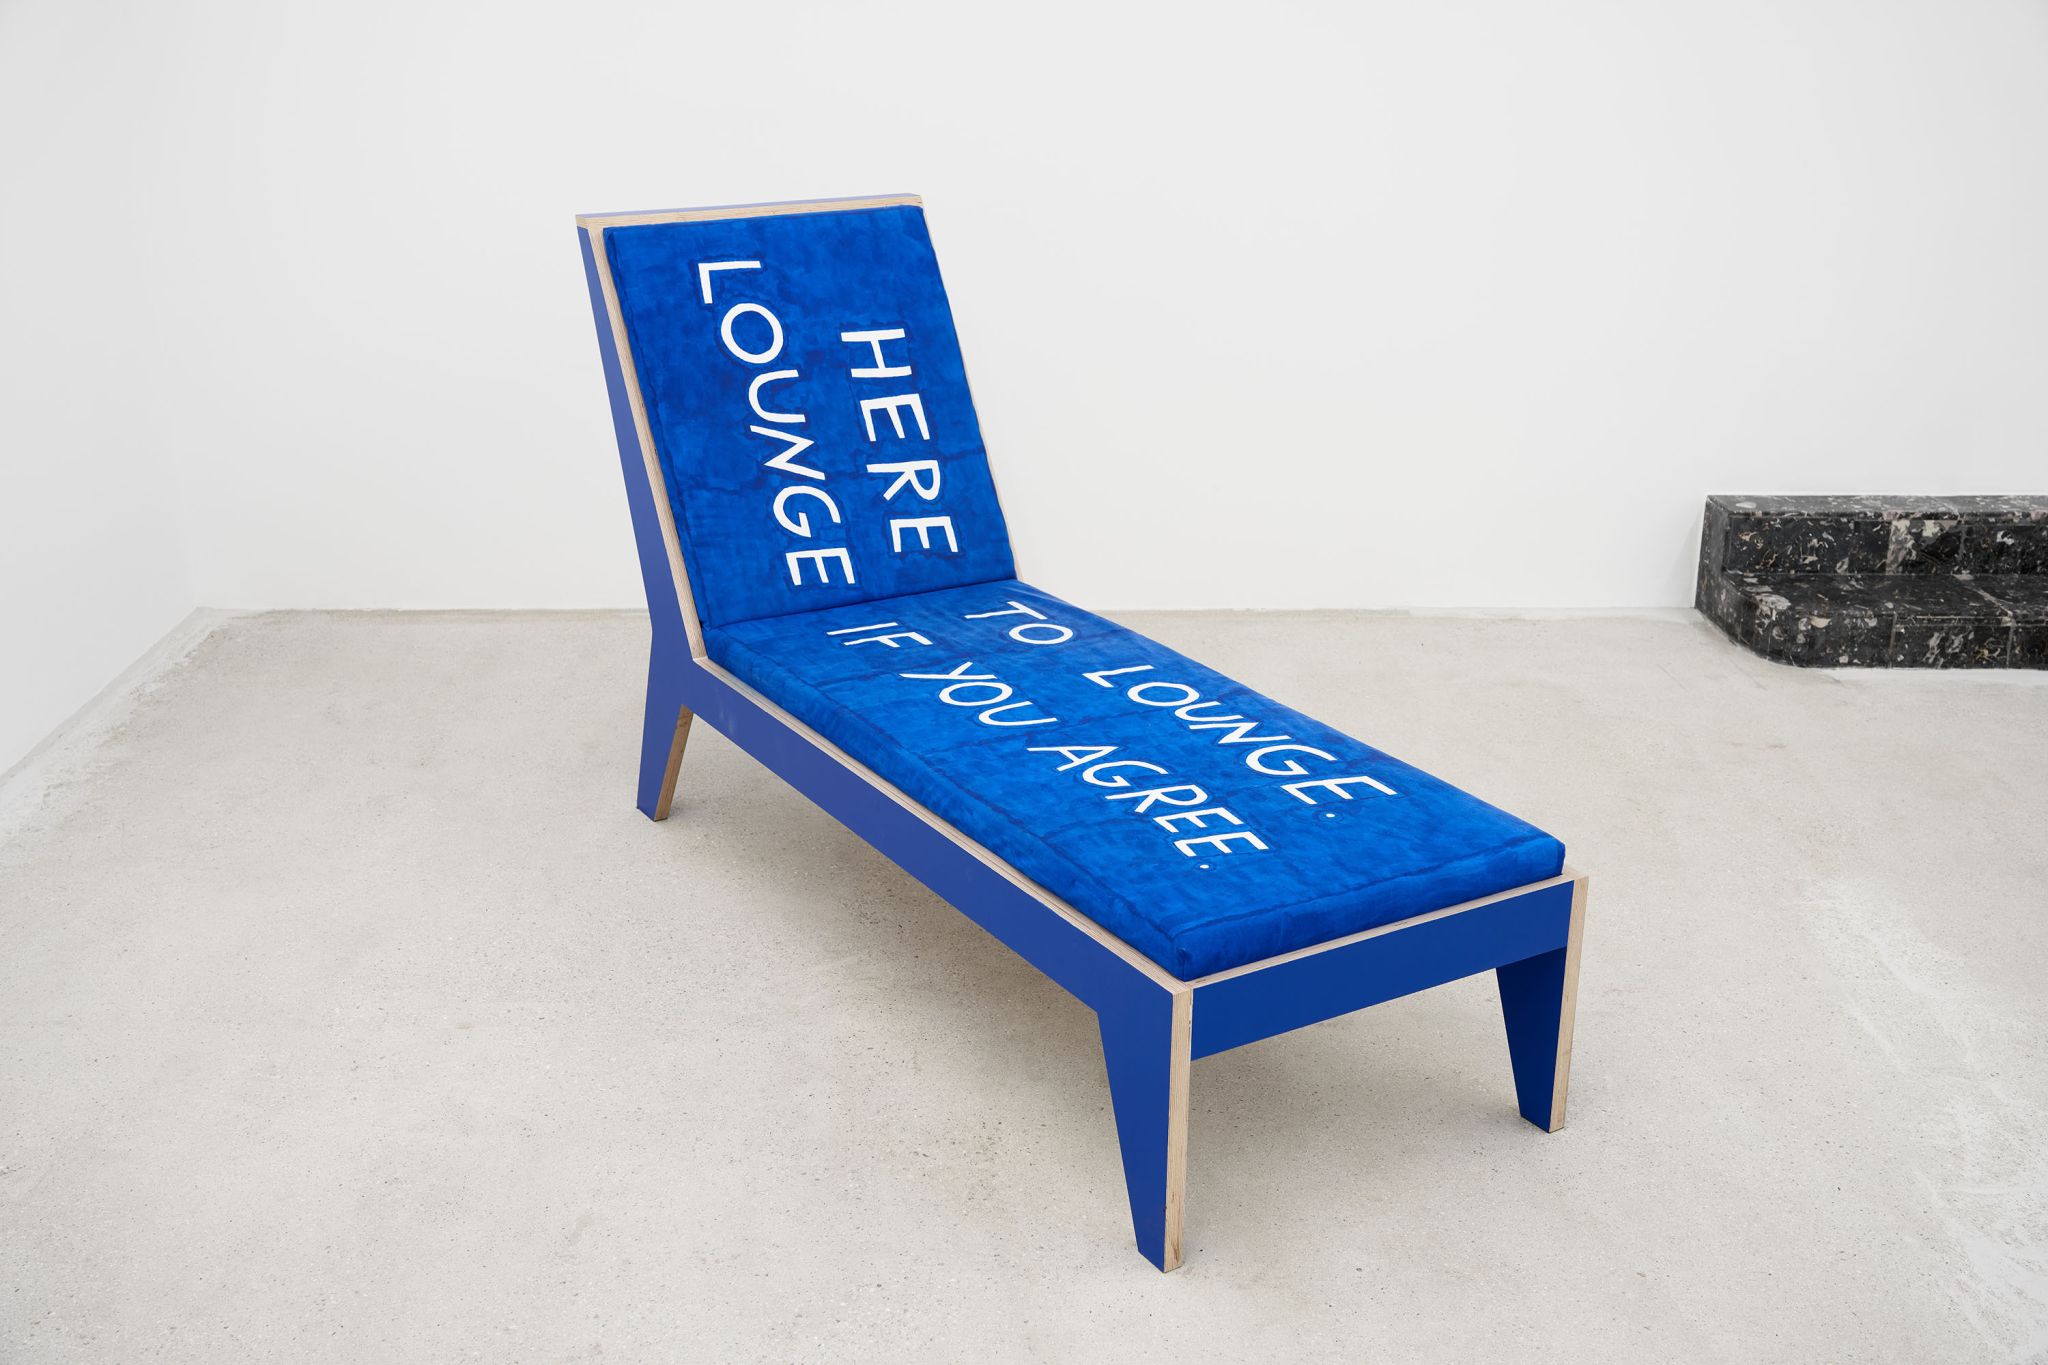 Finnegan Shannon, Do you want us here or not (MMK) – Chaise lounge 3, 2021, Plywood, paint, foam, fabric, fabric paint, 110.5 ⁠× ⁠190 ⁠× ⁠68.5 ⁠⁠cm, Image description: A blue chaise lounge is standing in an exhibition room. On it, white letters read “Here to lounge. Lounge if you agree”.